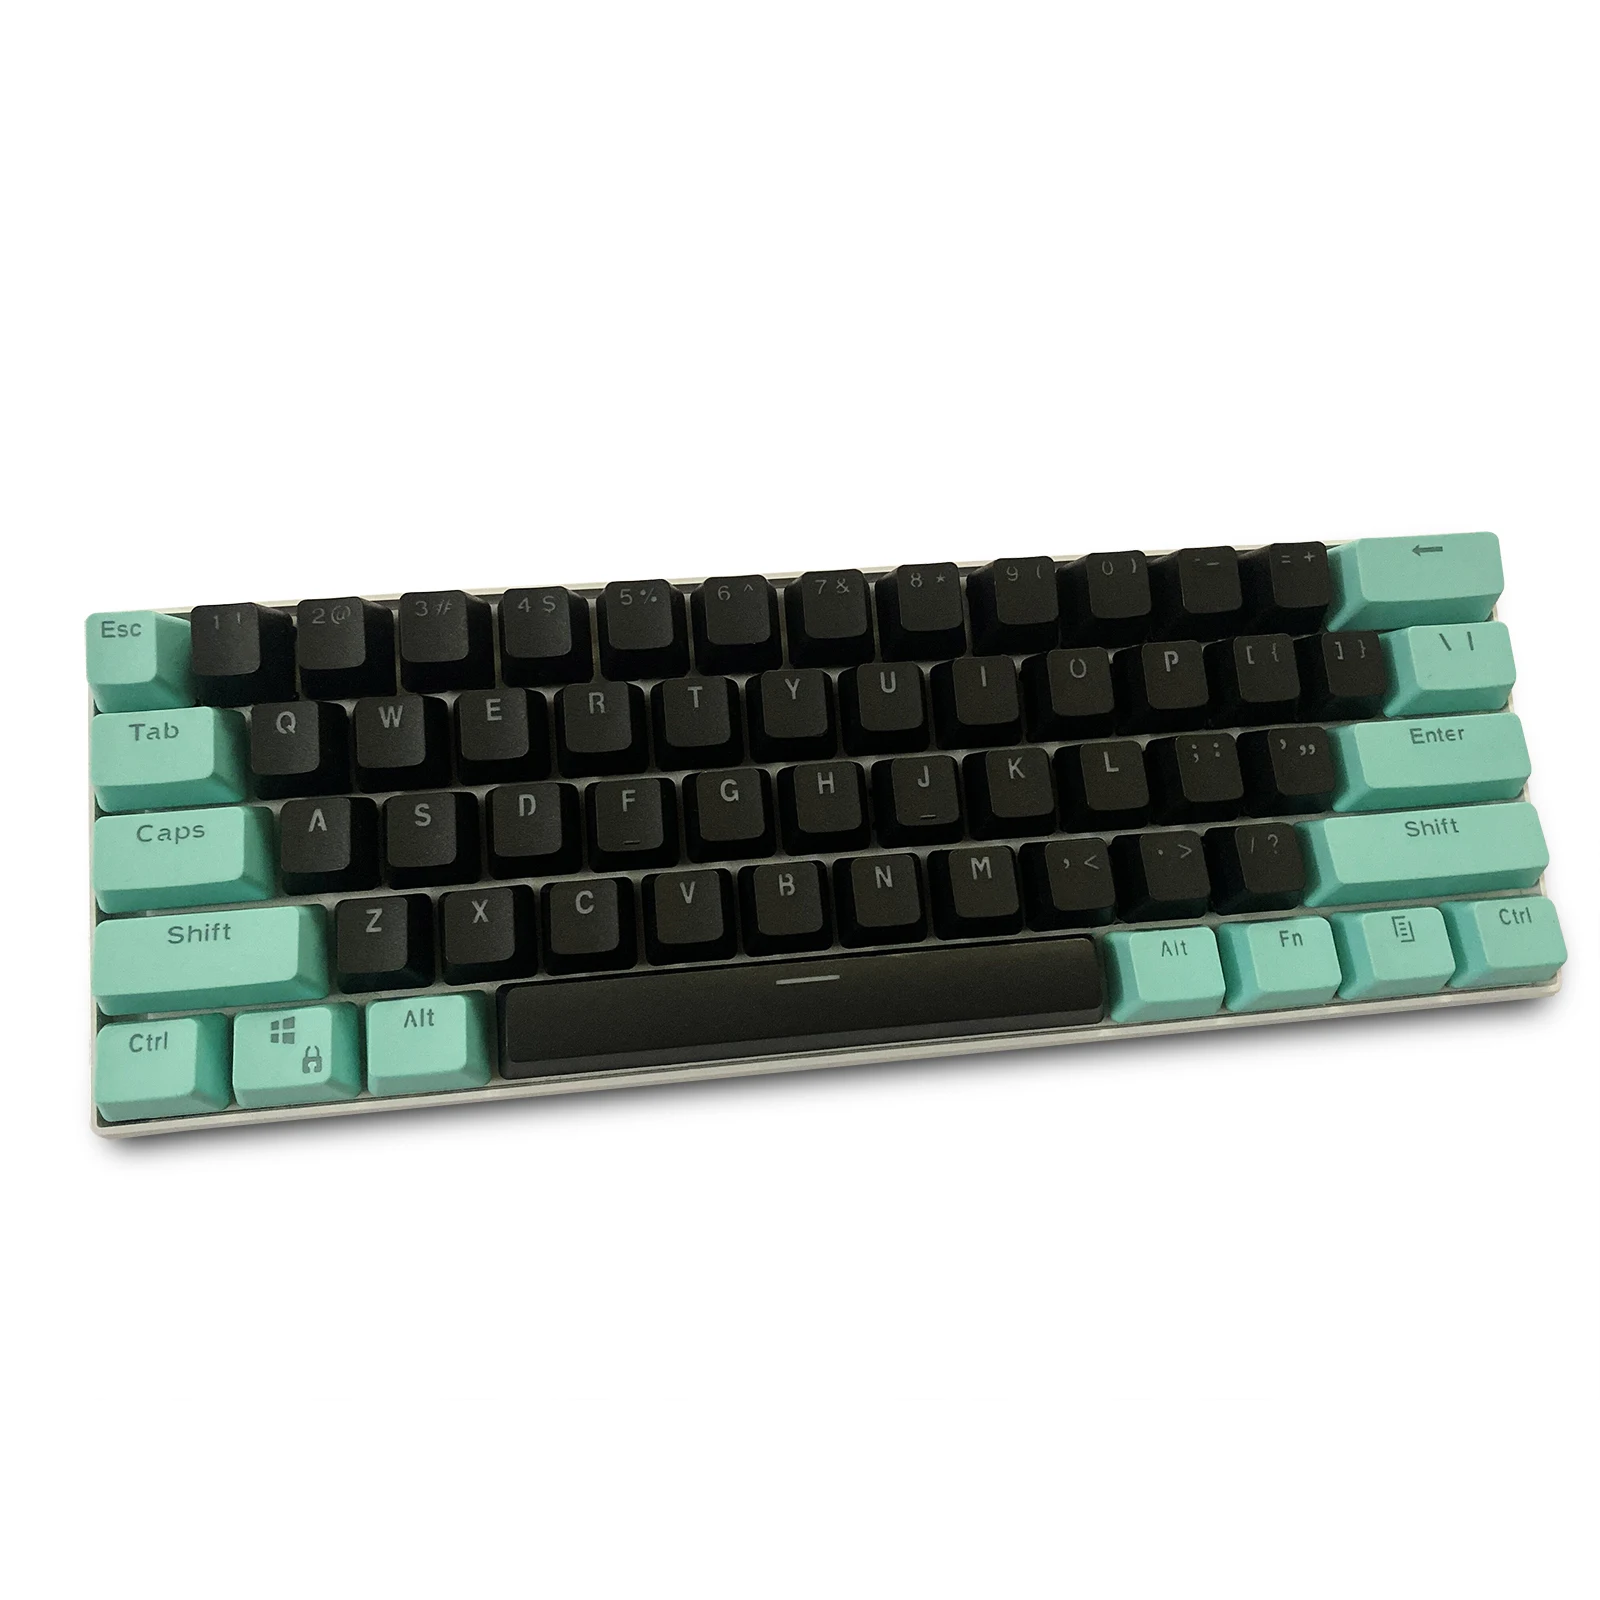 RK 61 Keycaps PBT Material OEM Highly Keycaps, Backlit Two-Color Mechanical  Keyboard Keycaps (Keycaps Only Sold) RK 61 Keycaps - AliExpress